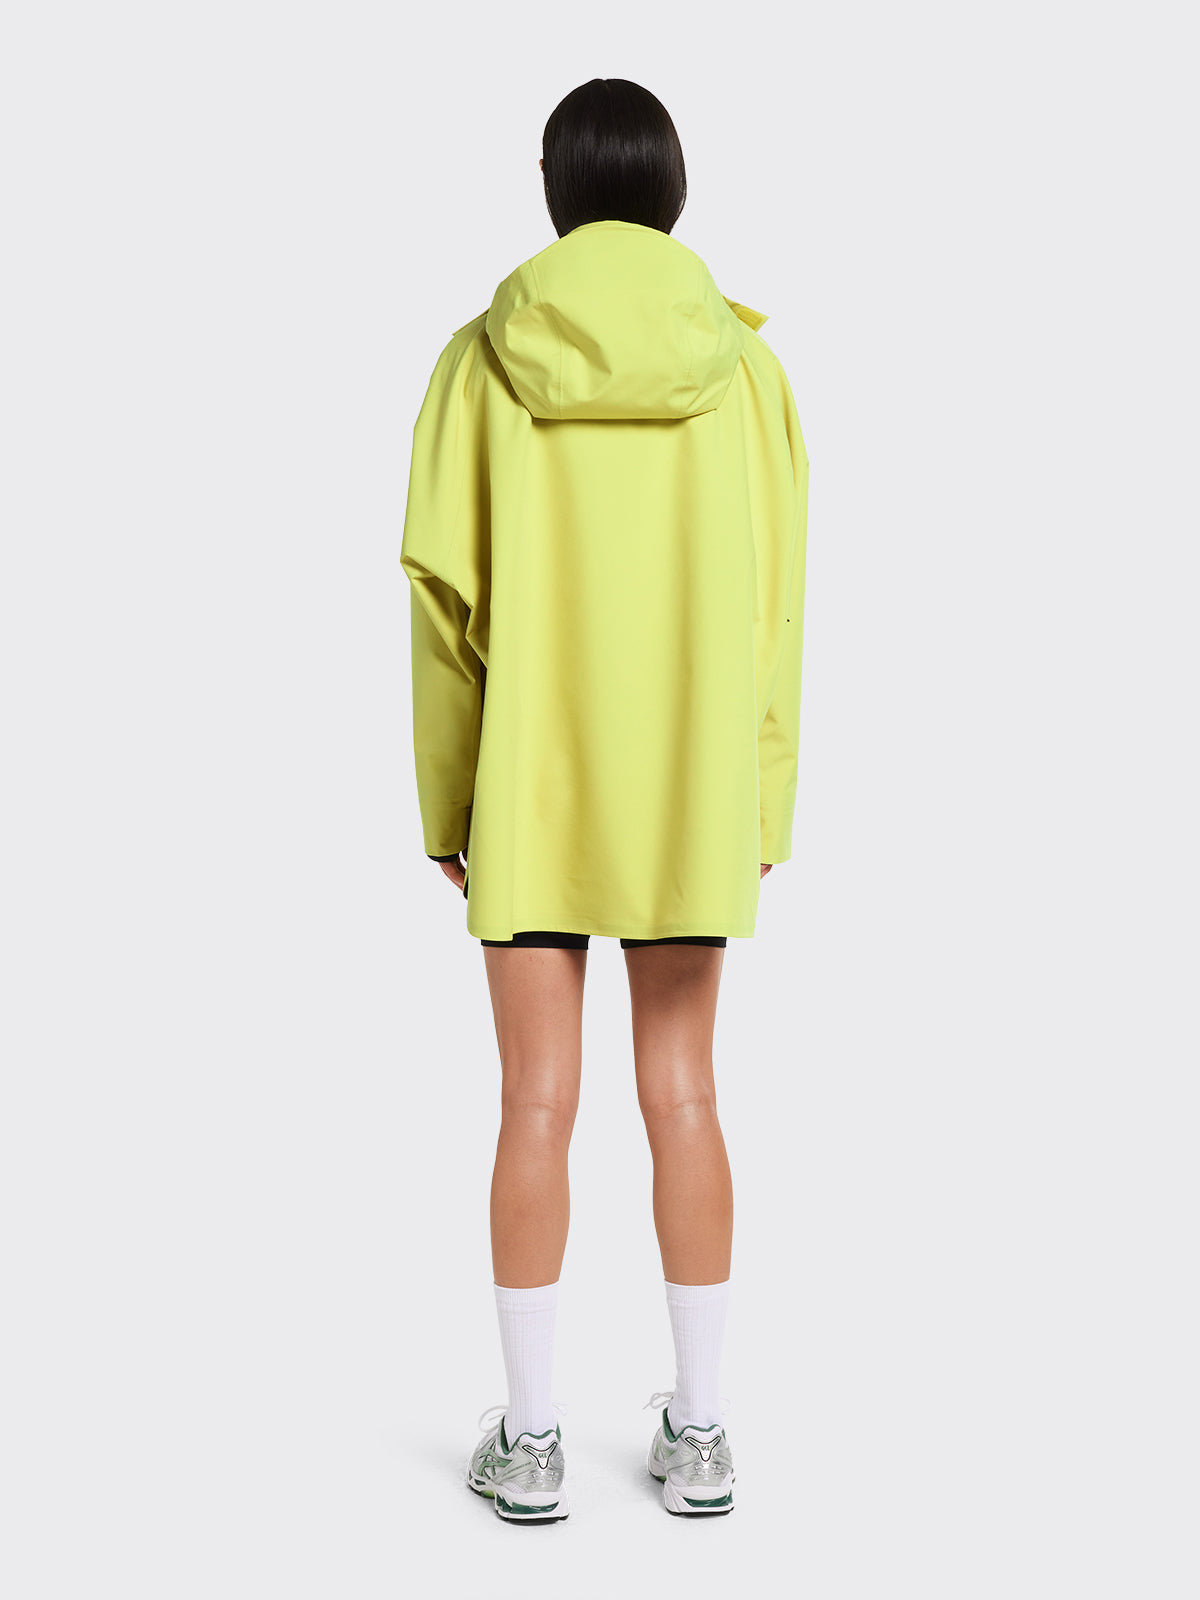 Woman in Voss poncho in the color Muted Lime from Blæst